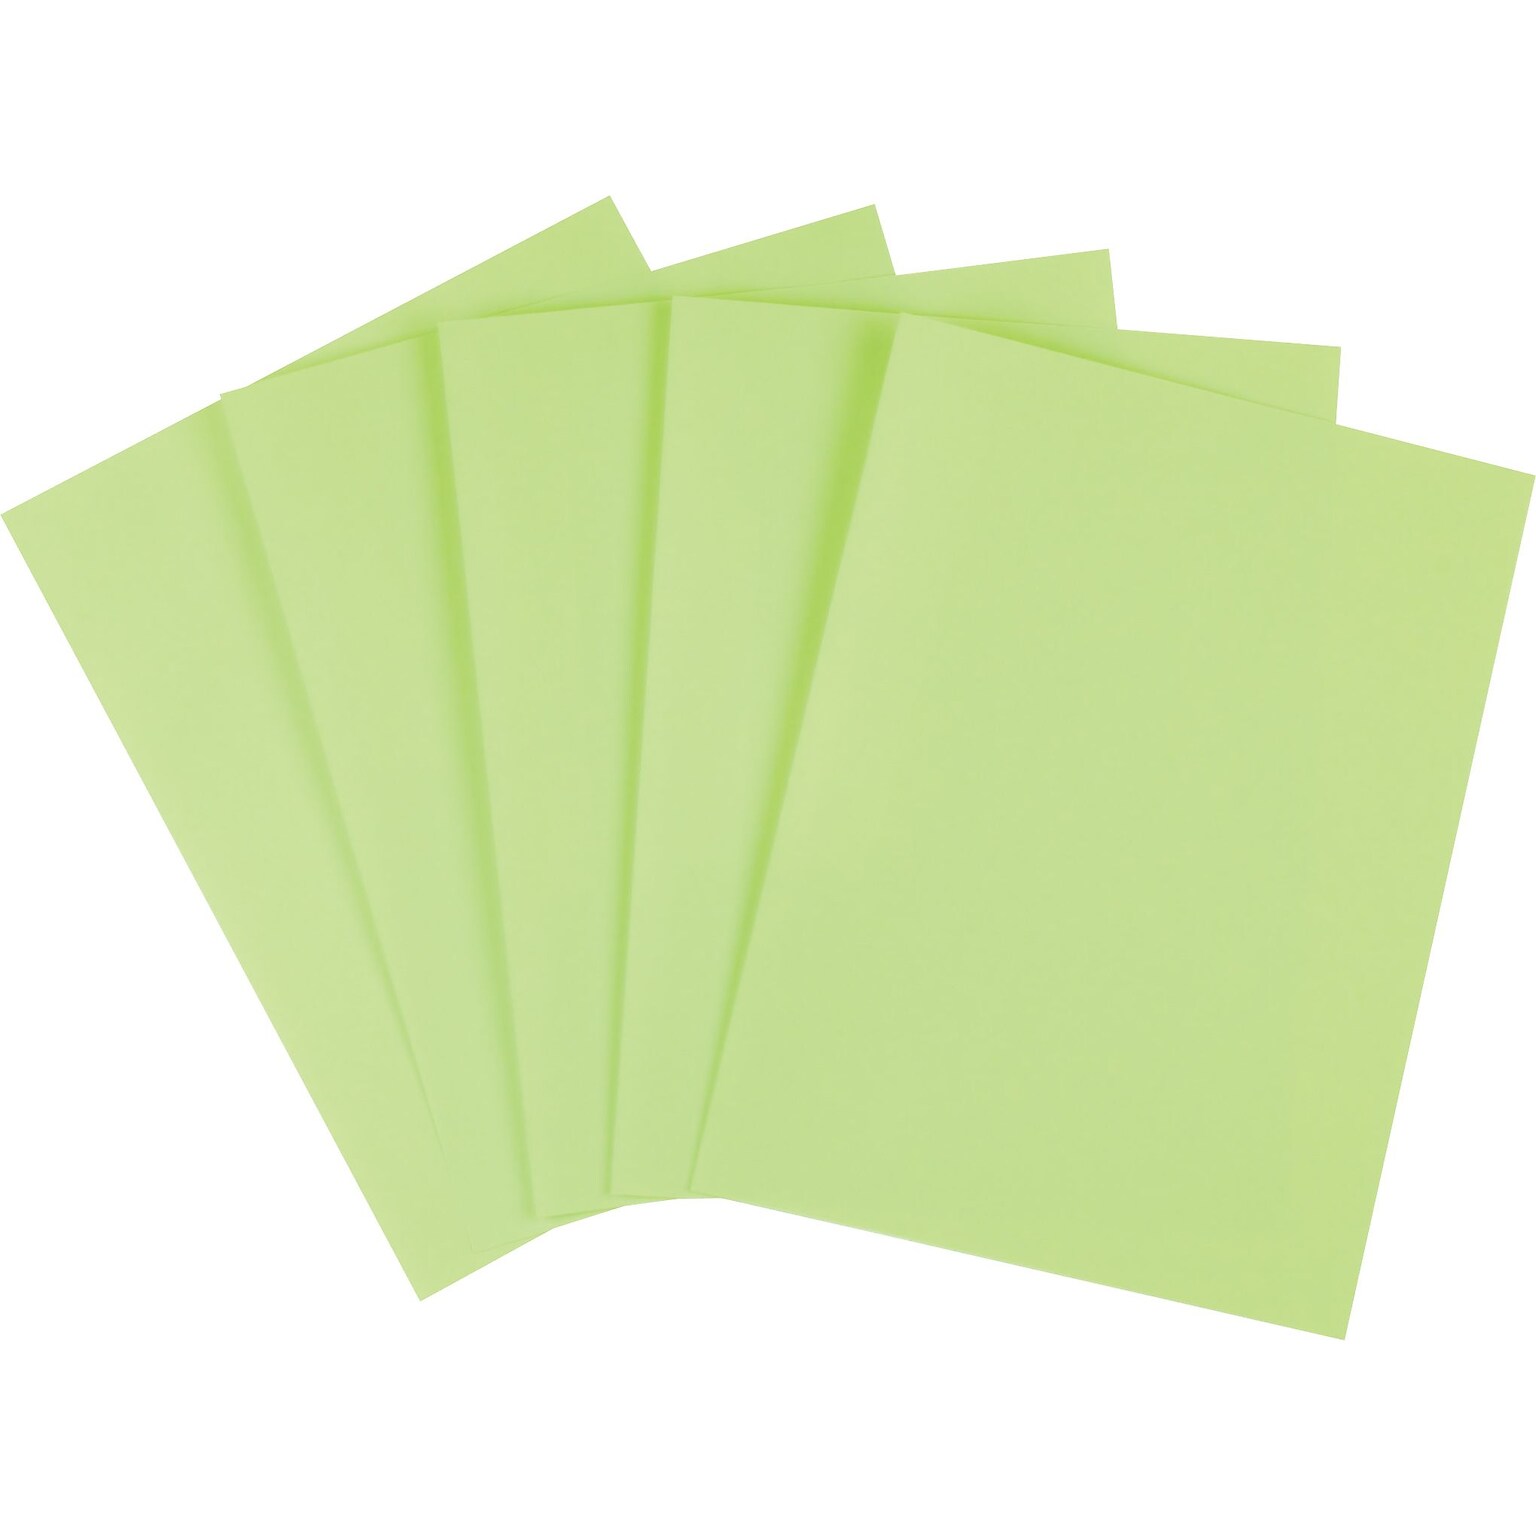 Staples Brights Multipurpose Colored Paper, 20 lbs., 8.5 x 11, Green, 500/Ream (25206)